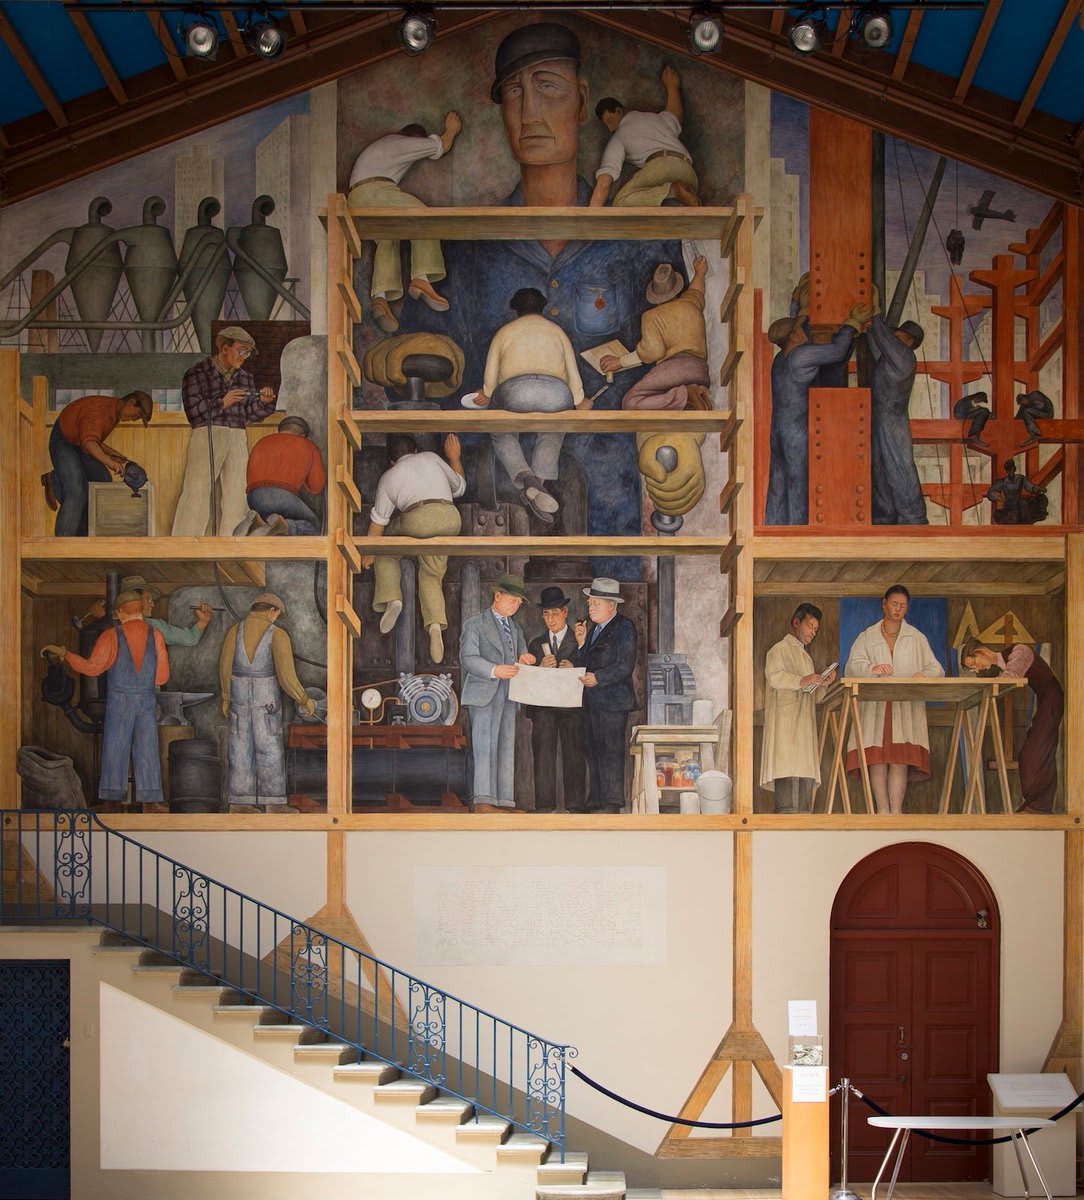 The cash-strapped San Francisco Art Institute may sell a beloved Diego Rivera mural to George Lucas for his museum: